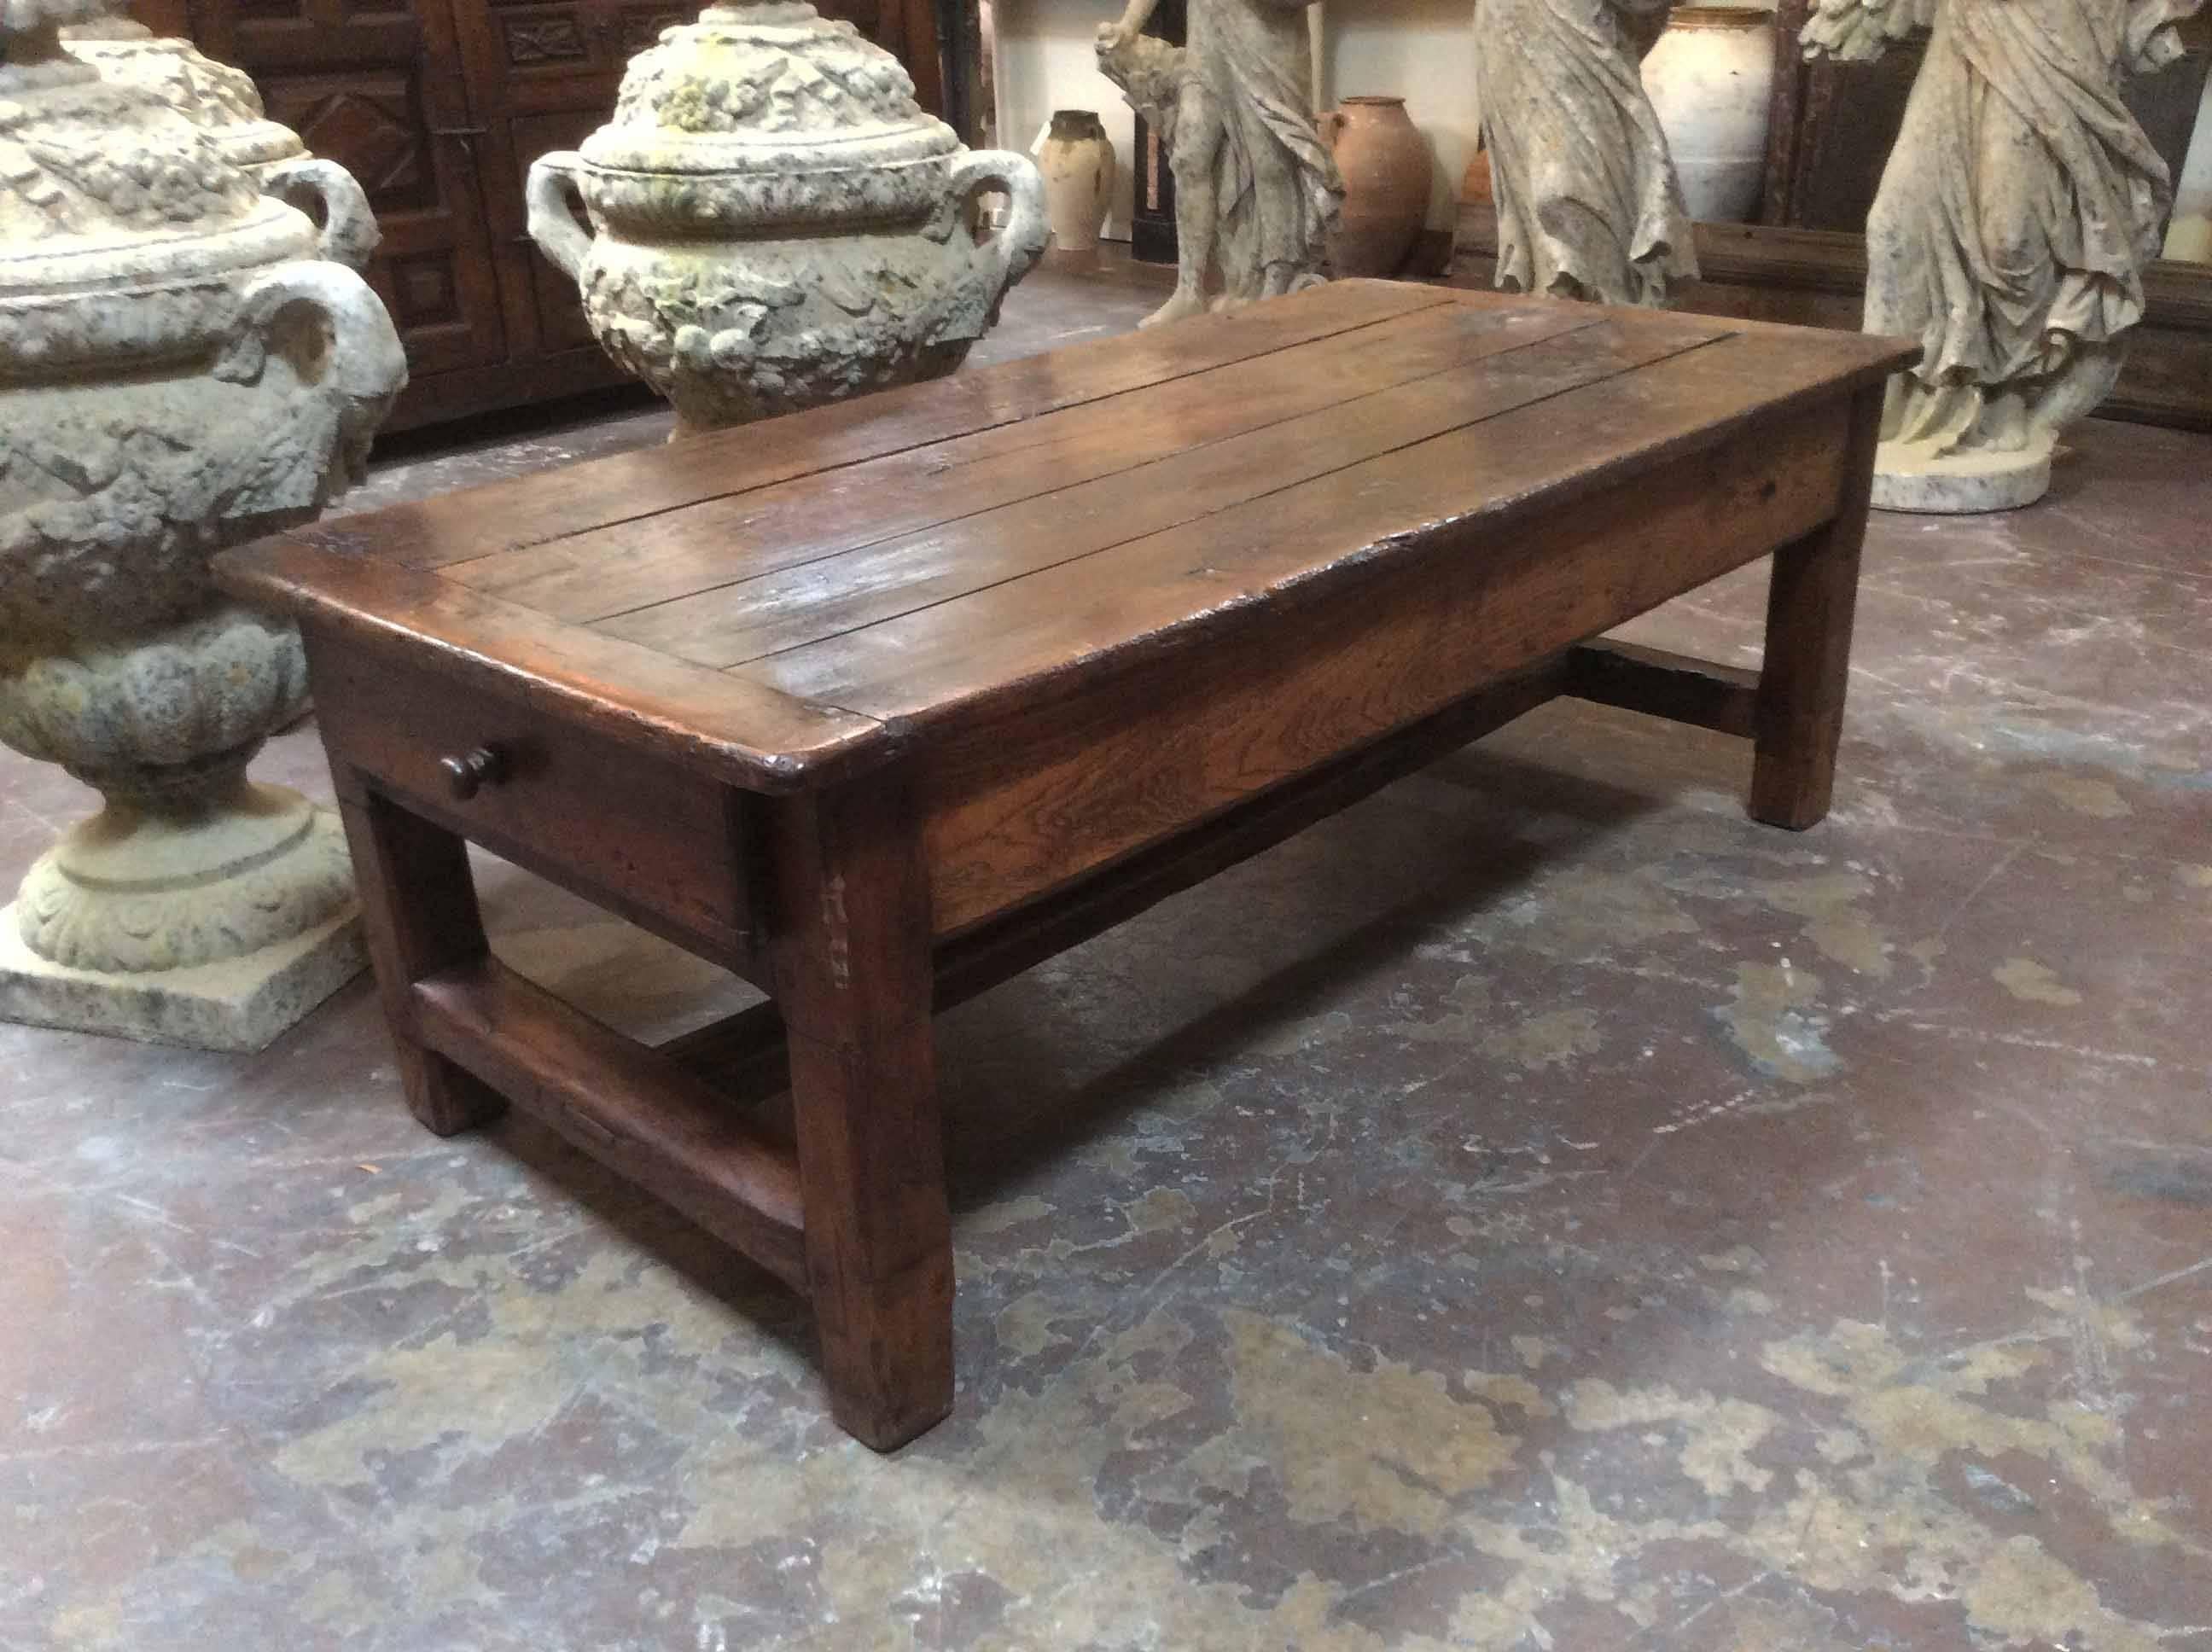 Charming antique french farm table features a rich, distressed patina with a drawer on each end.

Origin: France

c.1810’s

Measurements:
62 1/8″L x 30 5/16″D x 22 1/8″H